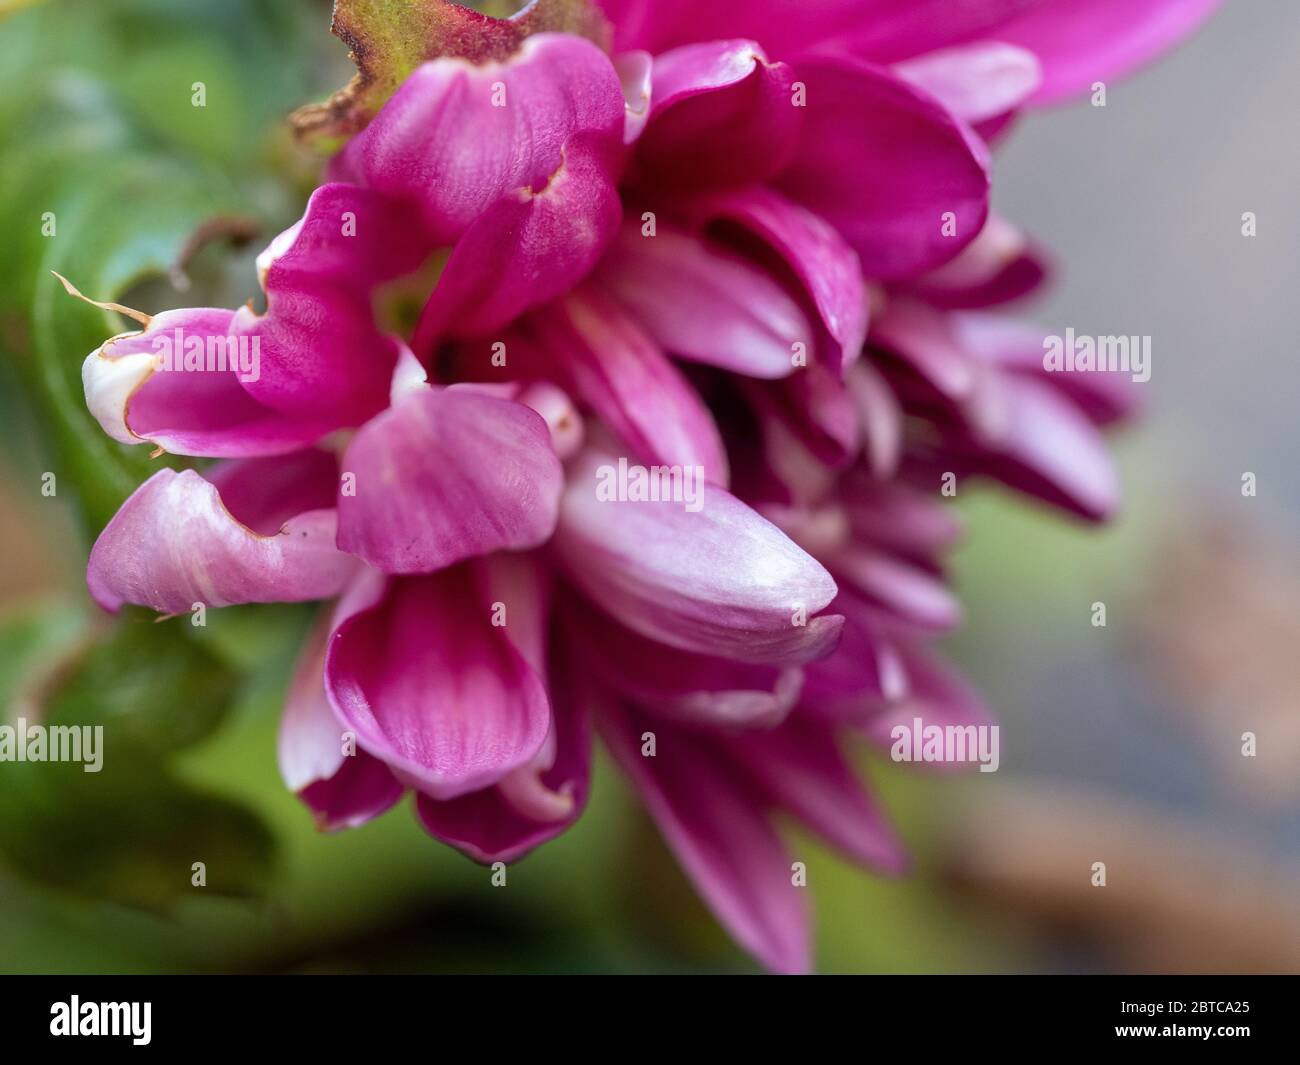 Macro of a pink Purple Chrysanthemum Flower blooming in the garden, blurred background Stock Photo